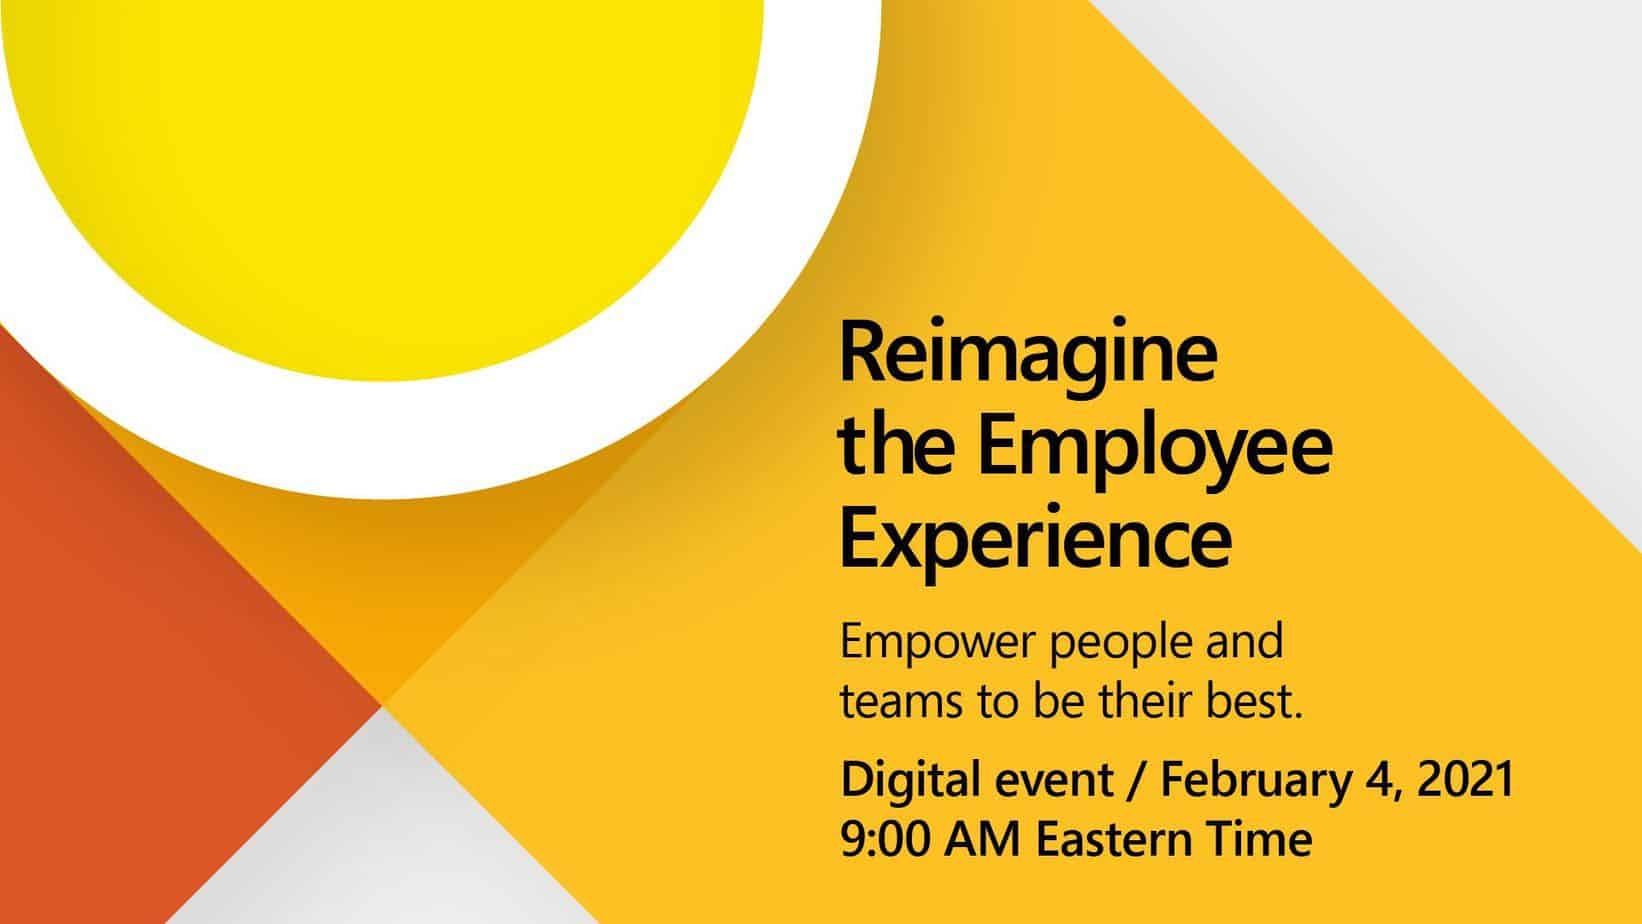 Reimaging the Employee Experience